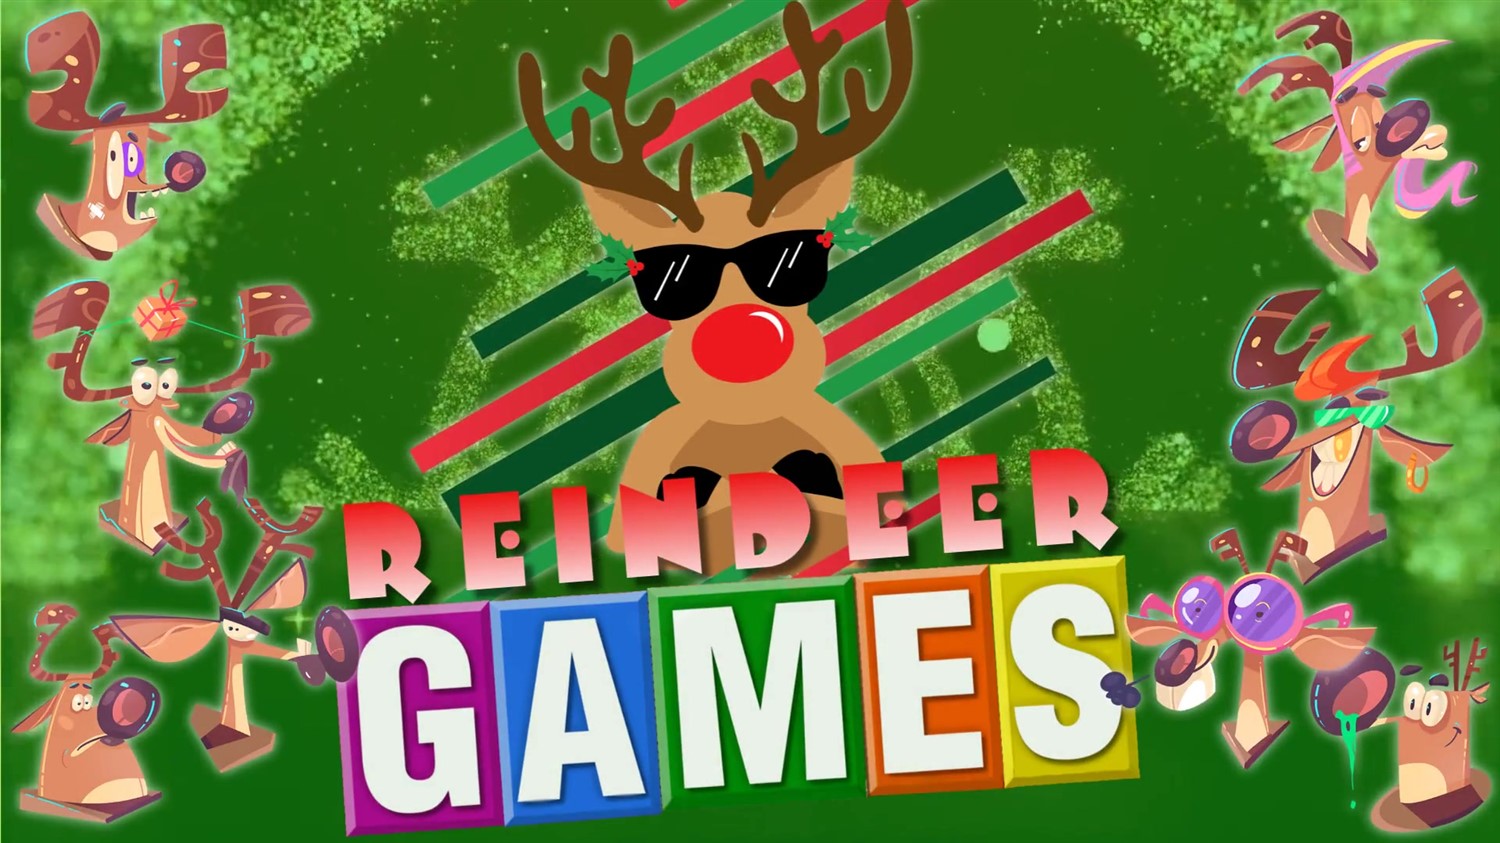 REINDEER GAMES Fun Holiday Game Show for All Ages on Dec 17, 19:00@FFX Theatre - Pick a seat, Buy tickets and Get information on Family Fun Xperience tickets.ffxshow.org